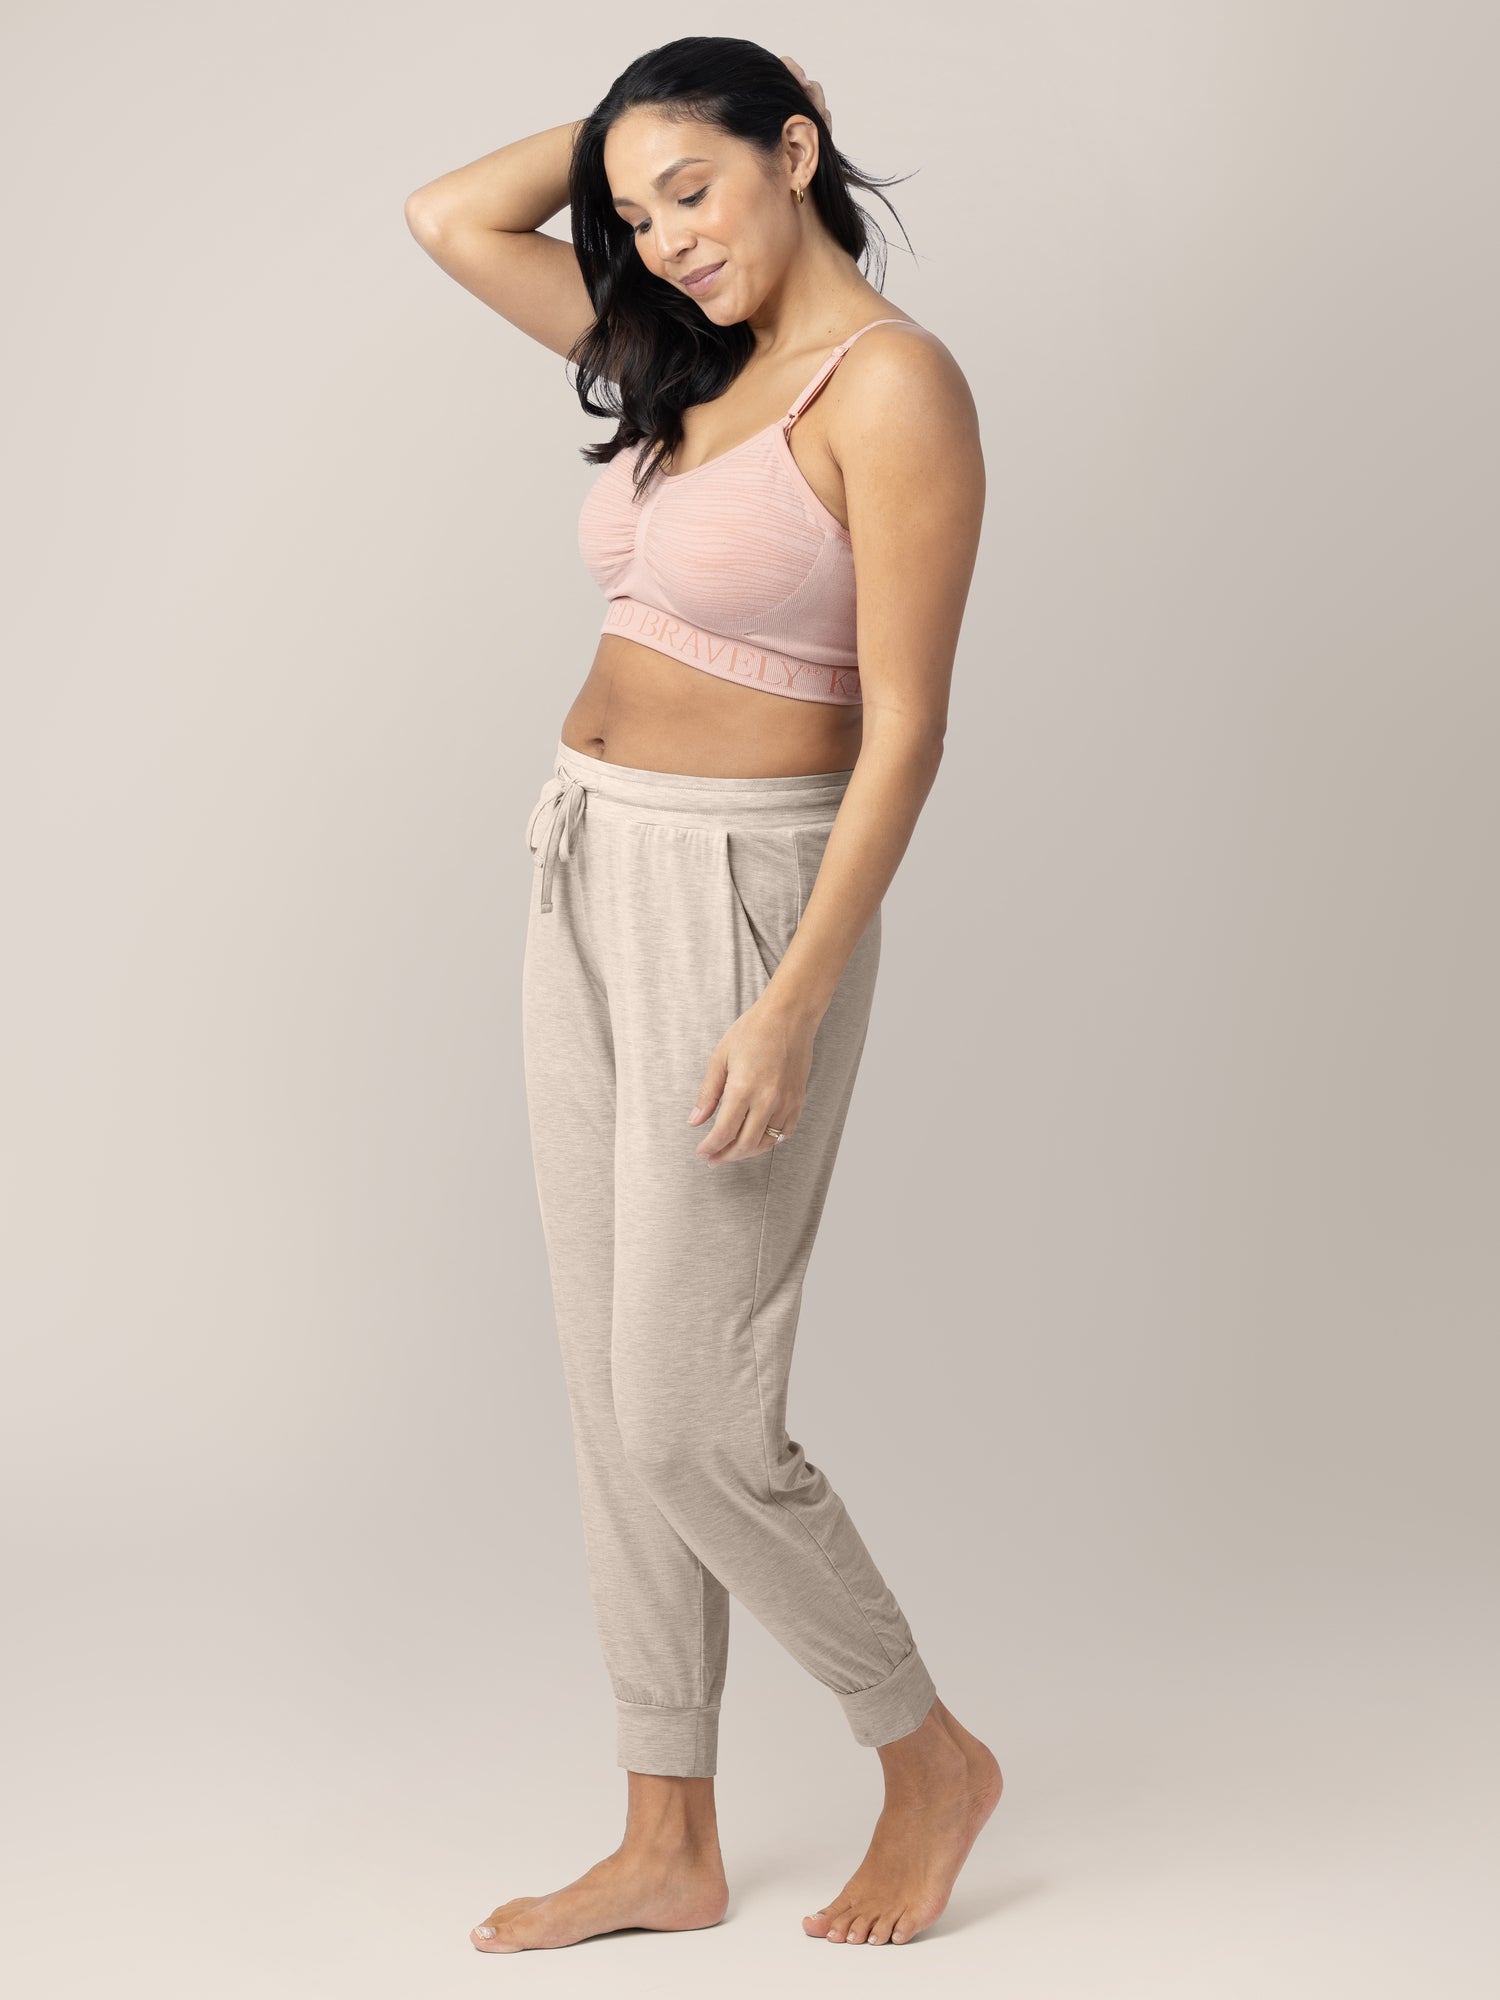 Model with her hand in her hair wearing the Sublime® Hands-Free Pumping & Nursing Bra in Pink Heather